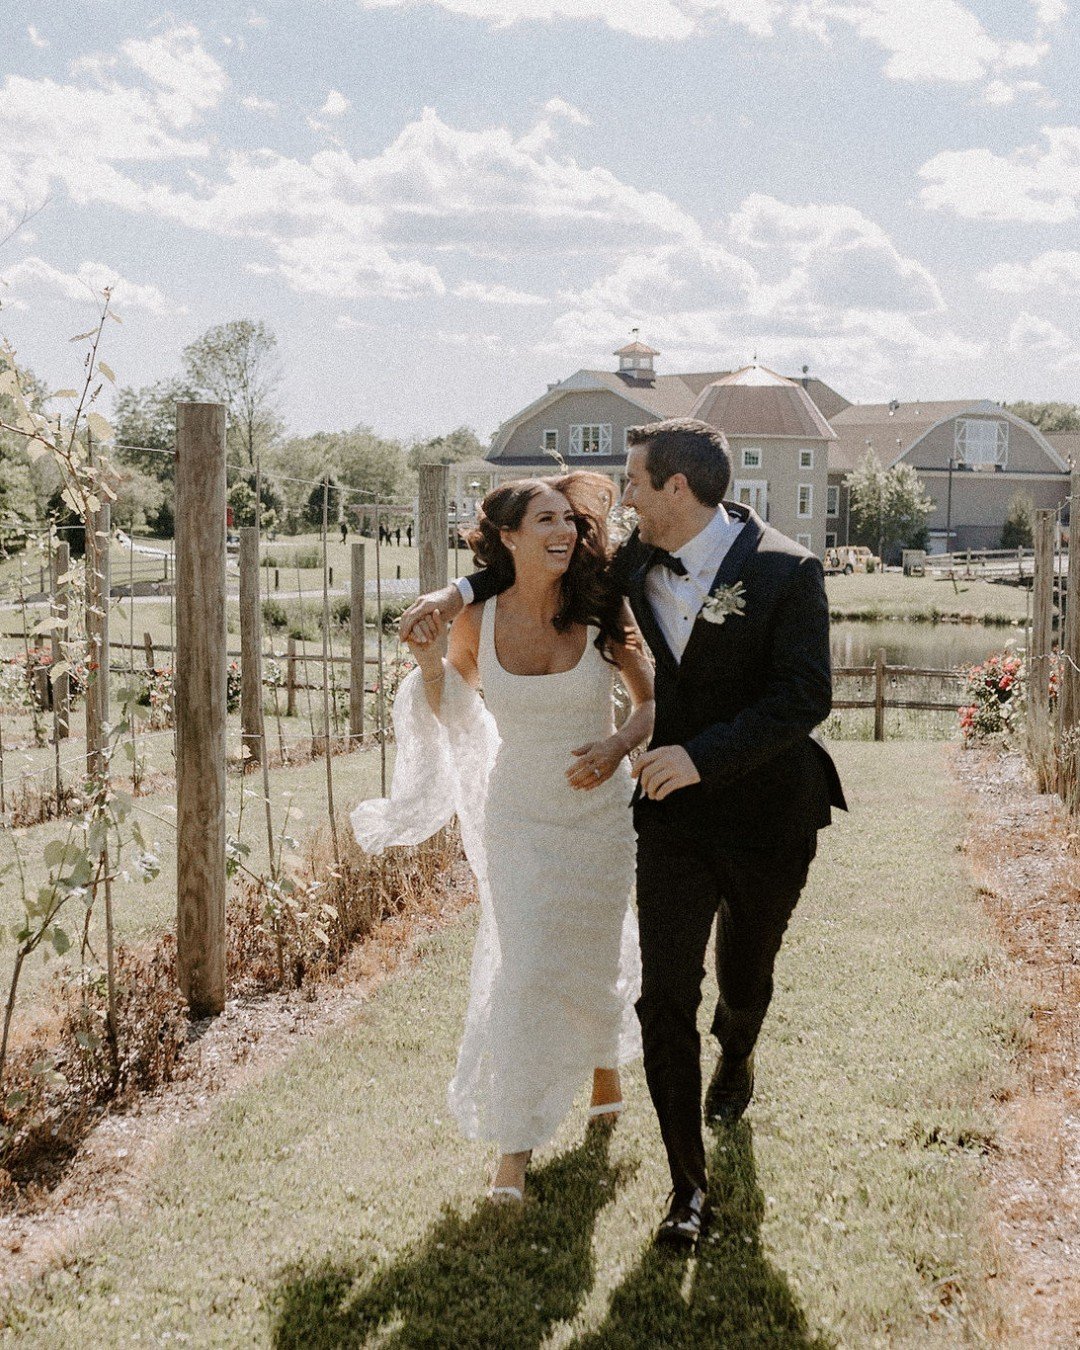 Looking through Nicole and Kevin's wedding photos is like watching a romantic movie ♡ From frolicking through the vineyard to twirling in the meadow to clinking glasses with bubbly, their June wedding was nothing short of magical!

📸 @ravenandthewil